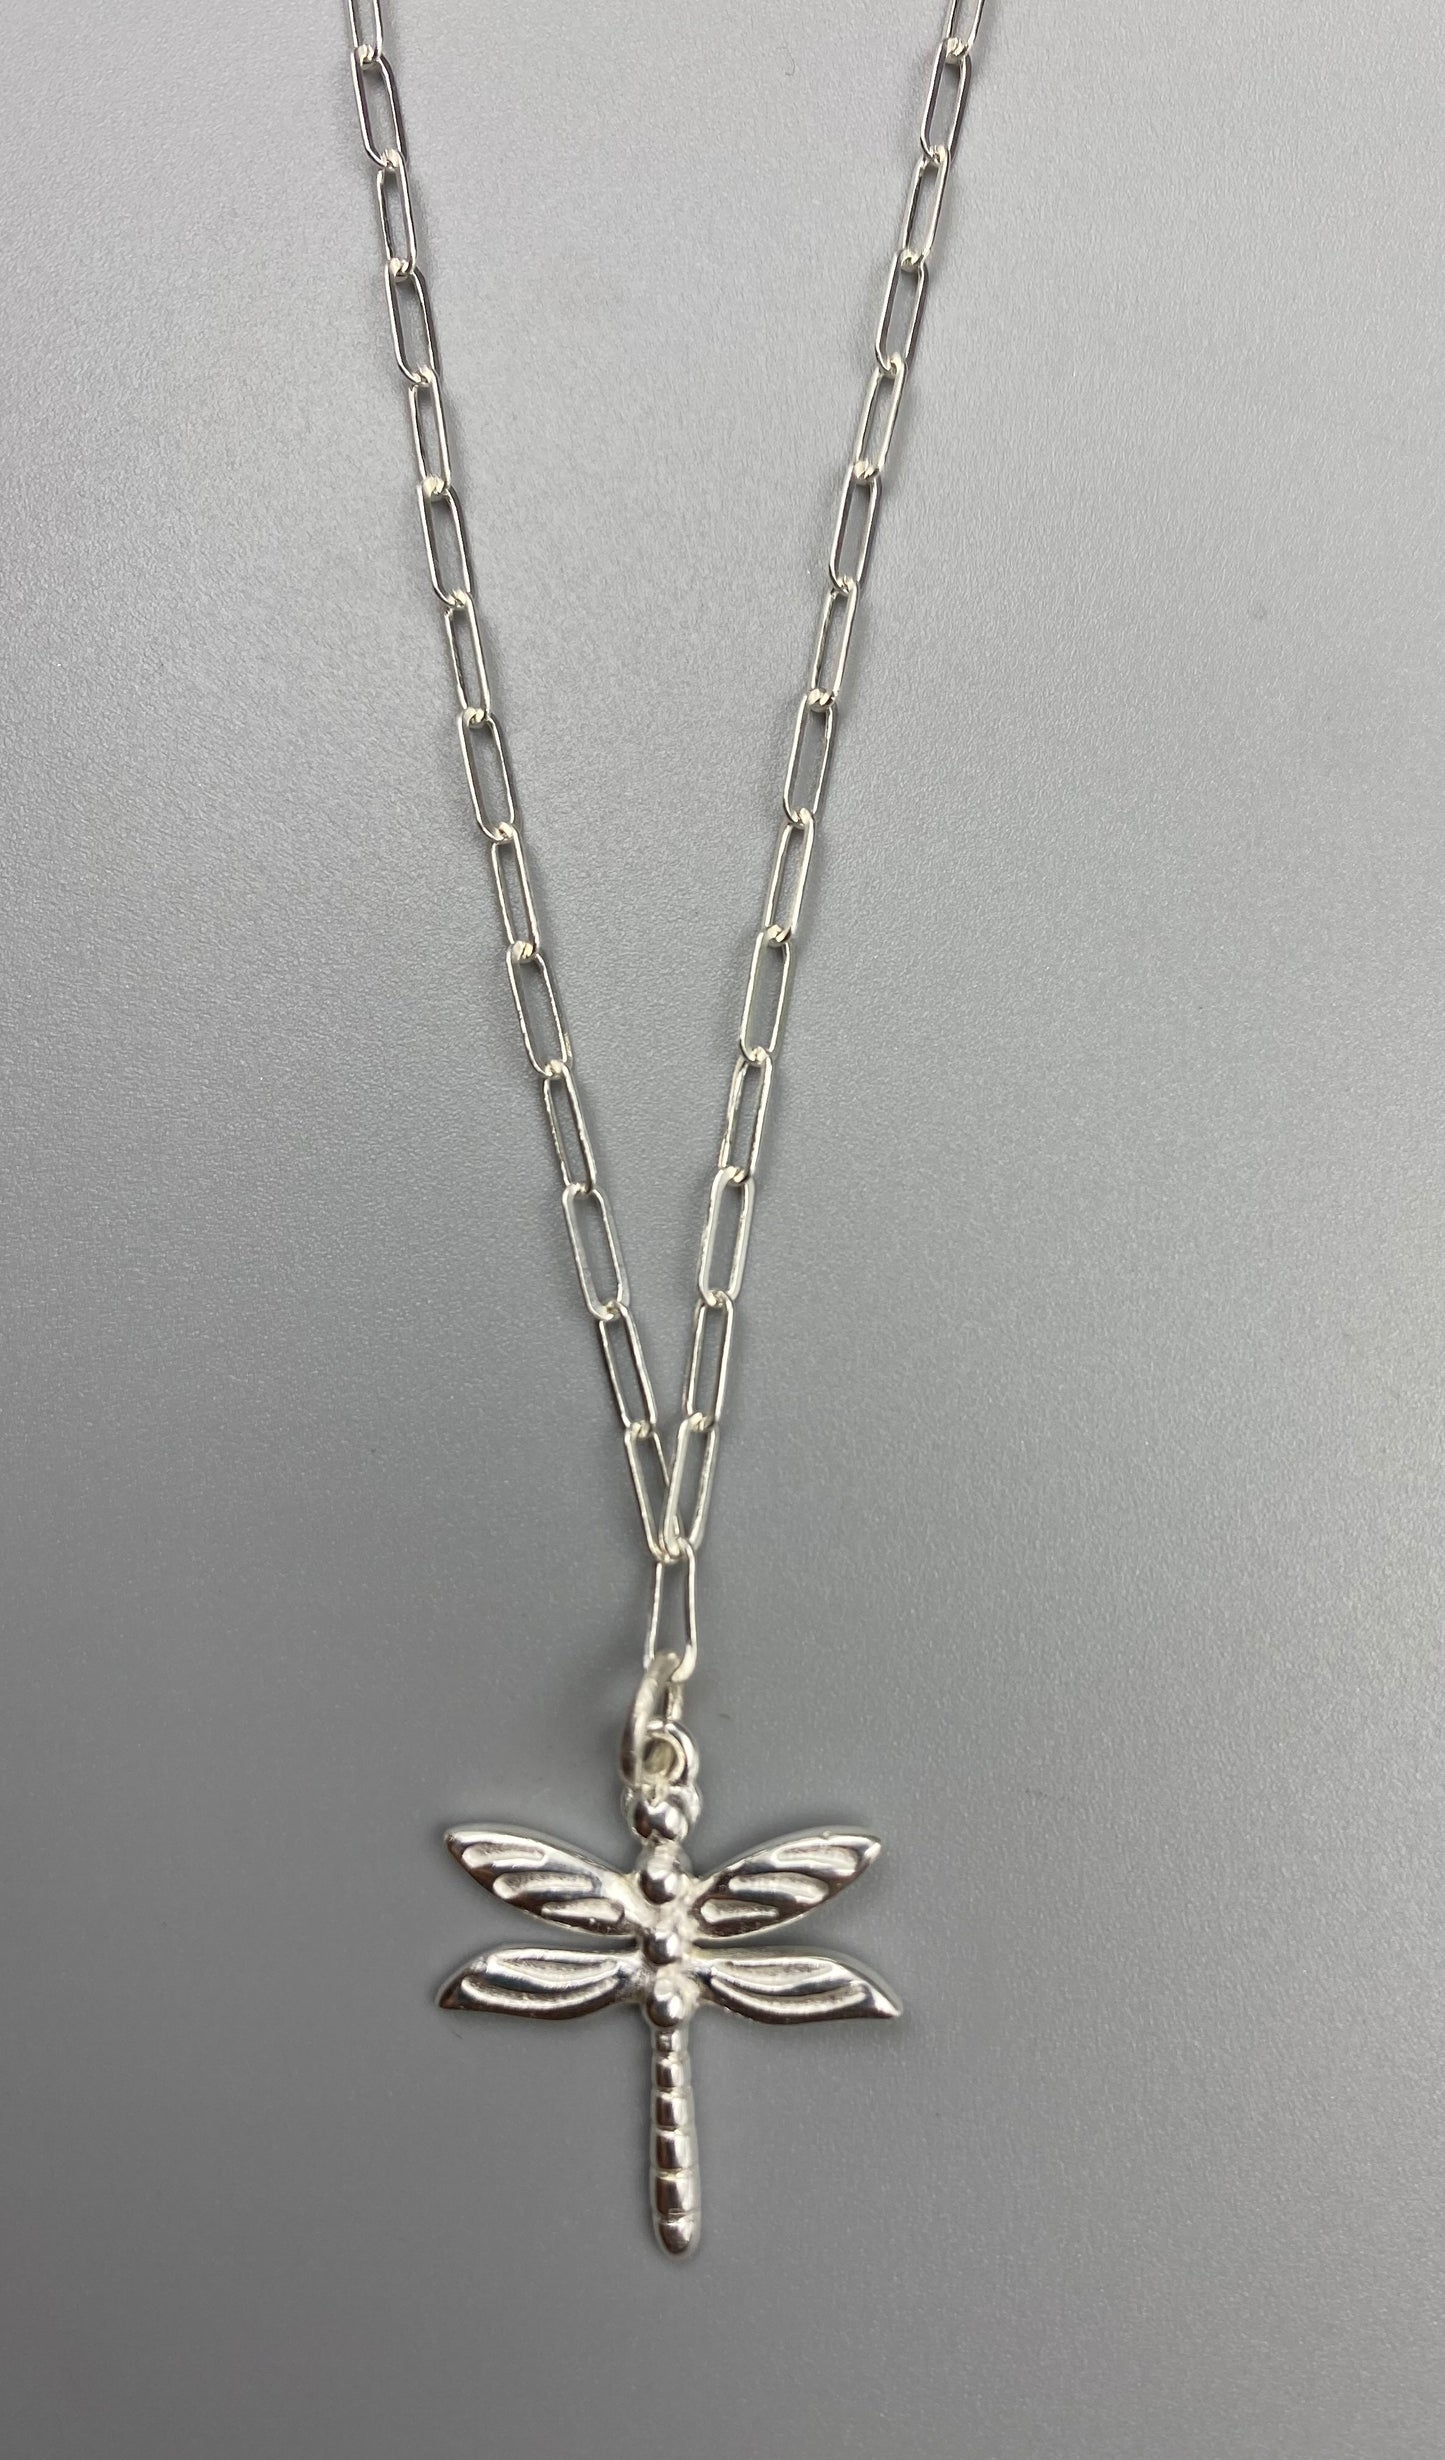 Dragonfly charm skinny trace chain necklace in Sterling Silver